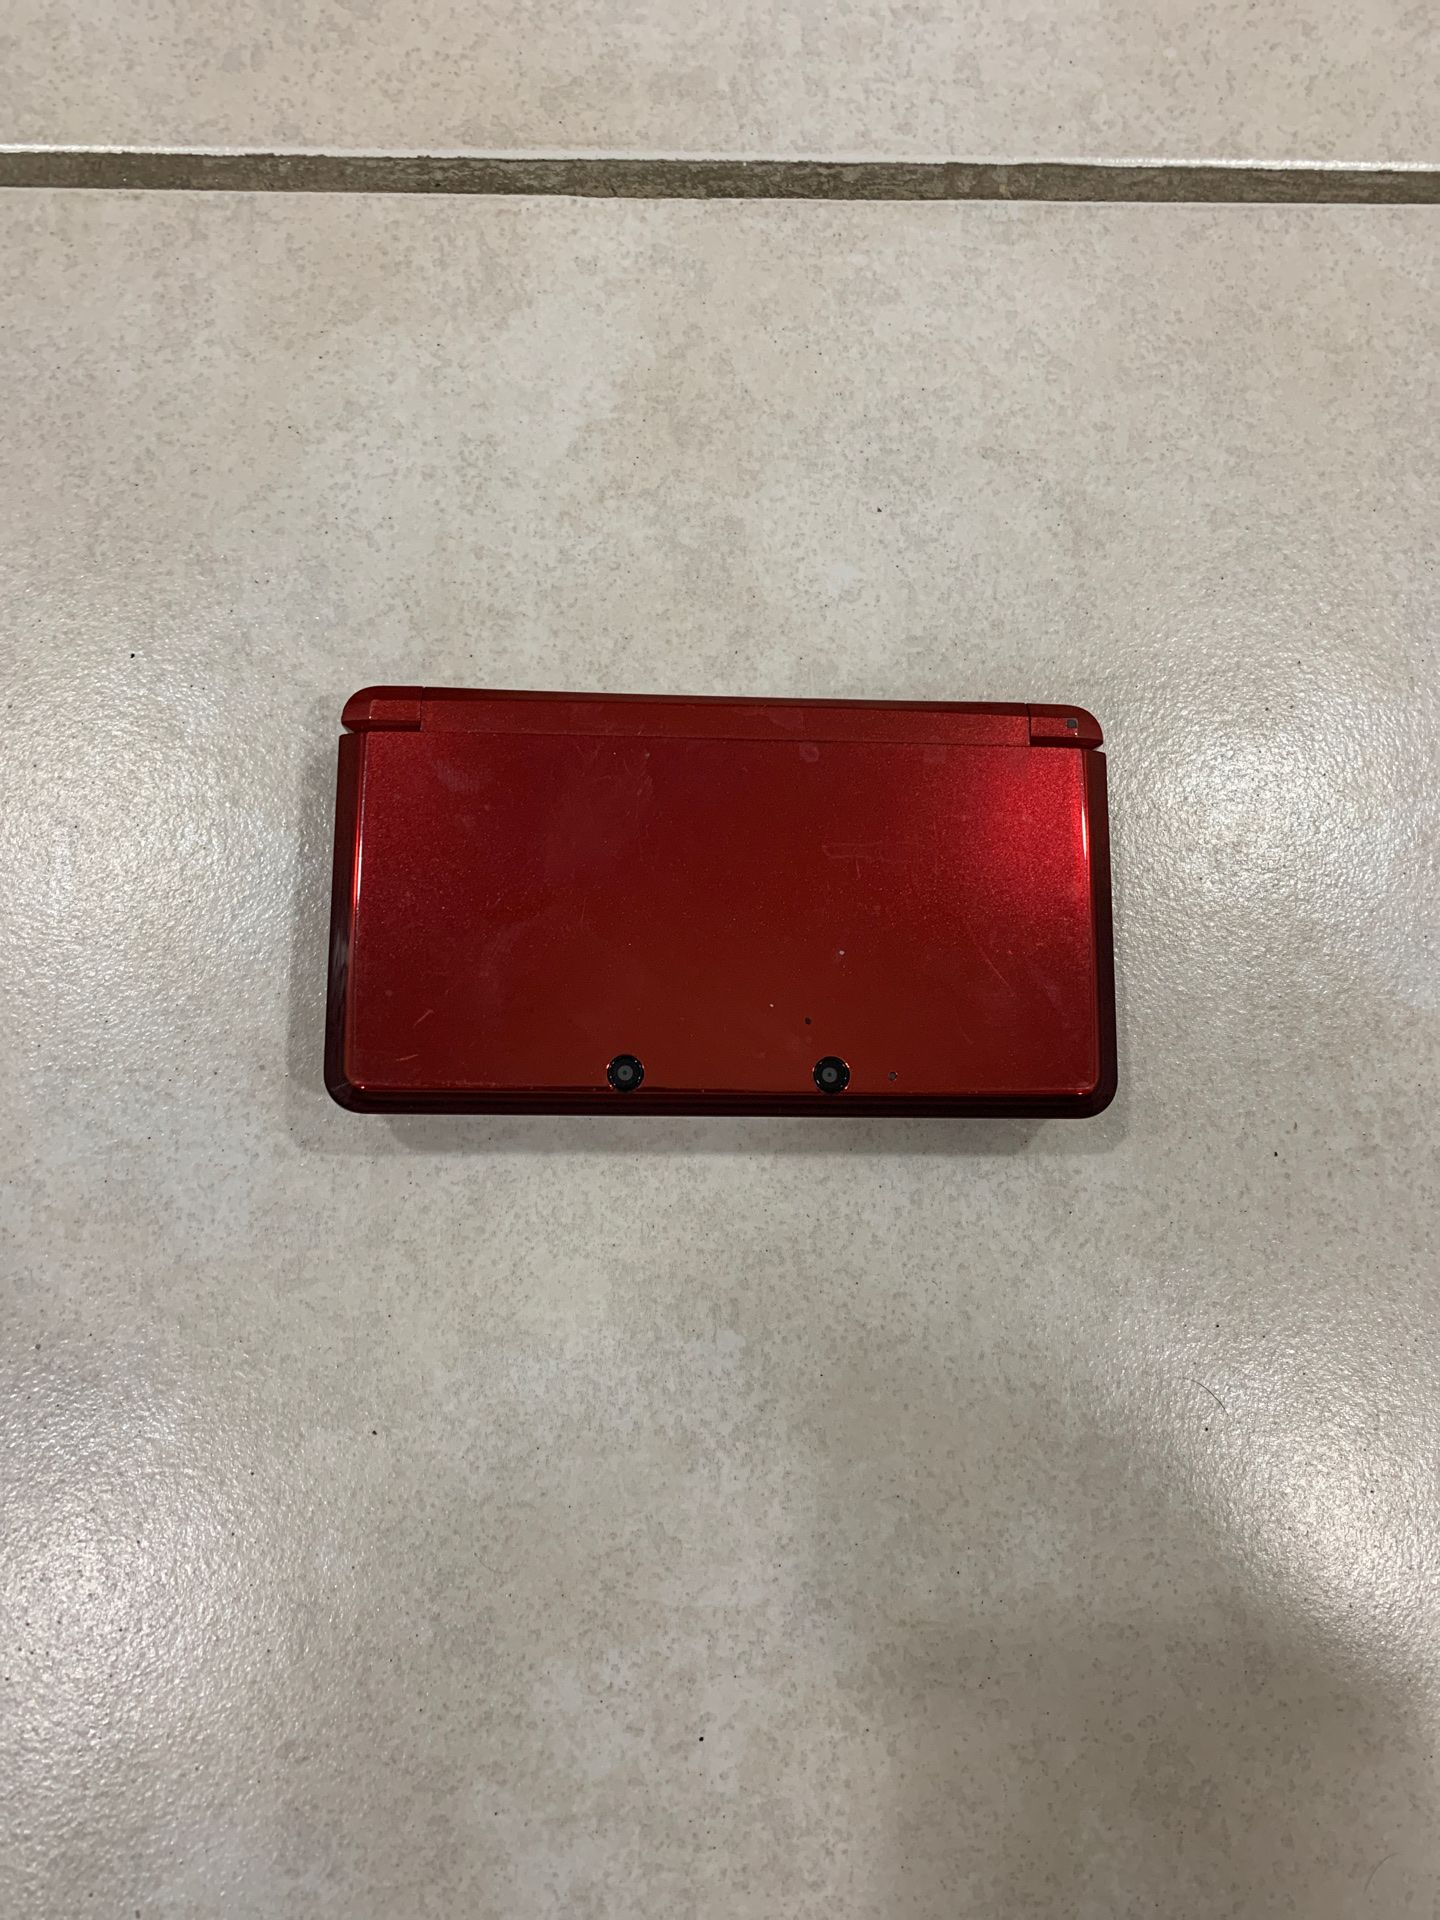 red Nintendo 3ds with no charger or stylus, Pokémon game included